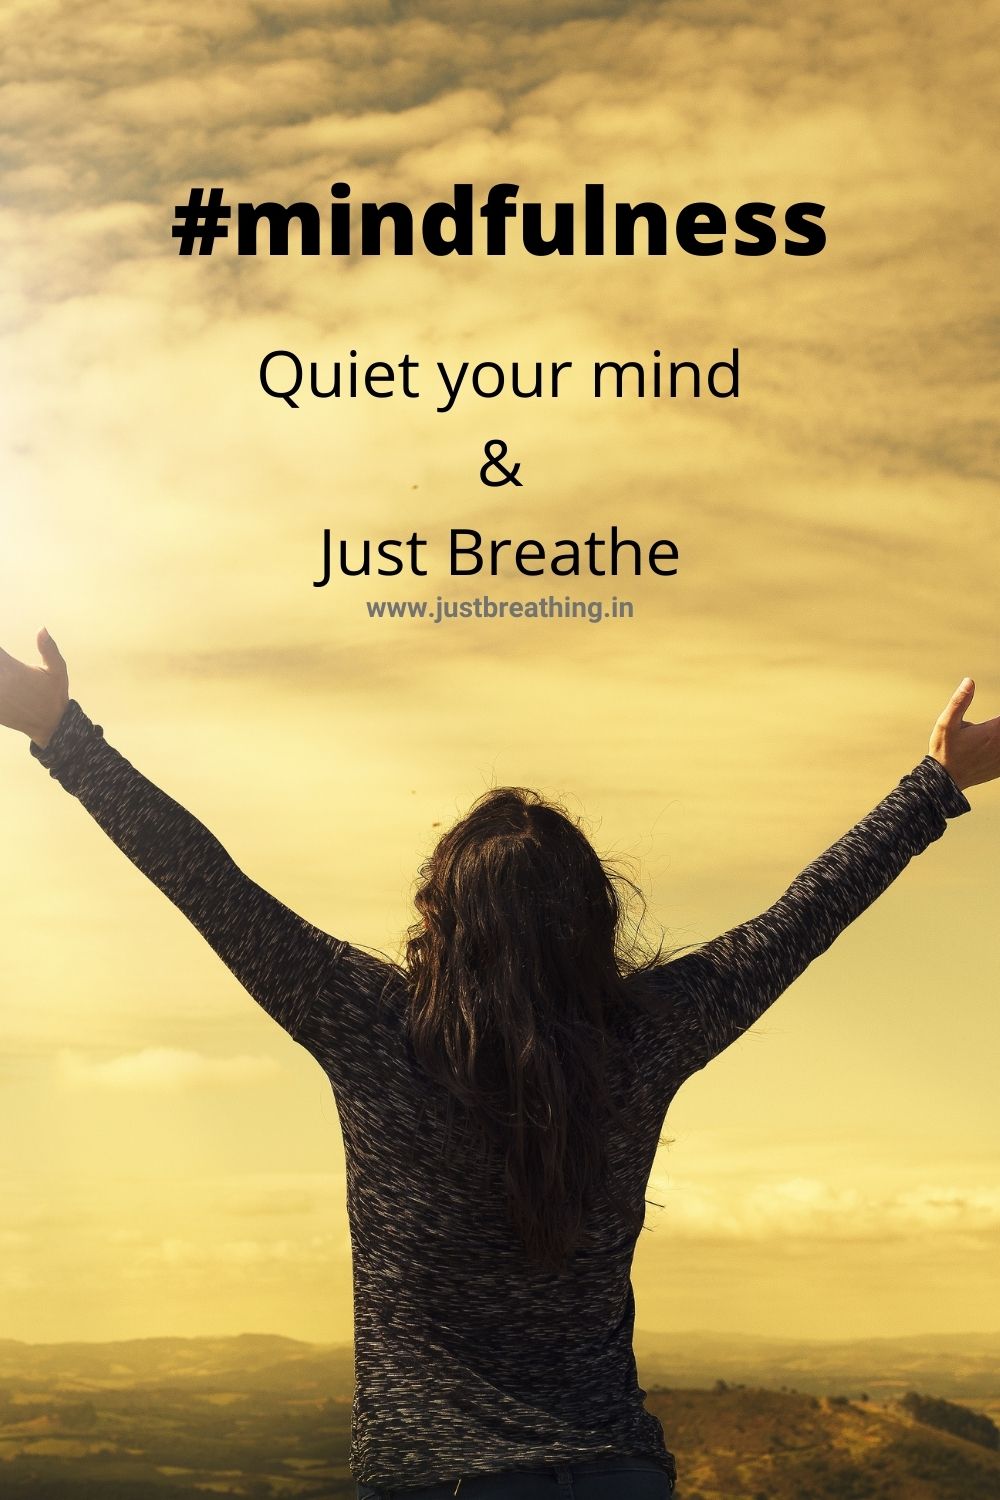 mindfulness hashtags to quiet your mind and just breathe. Best hashtags of mindfulness